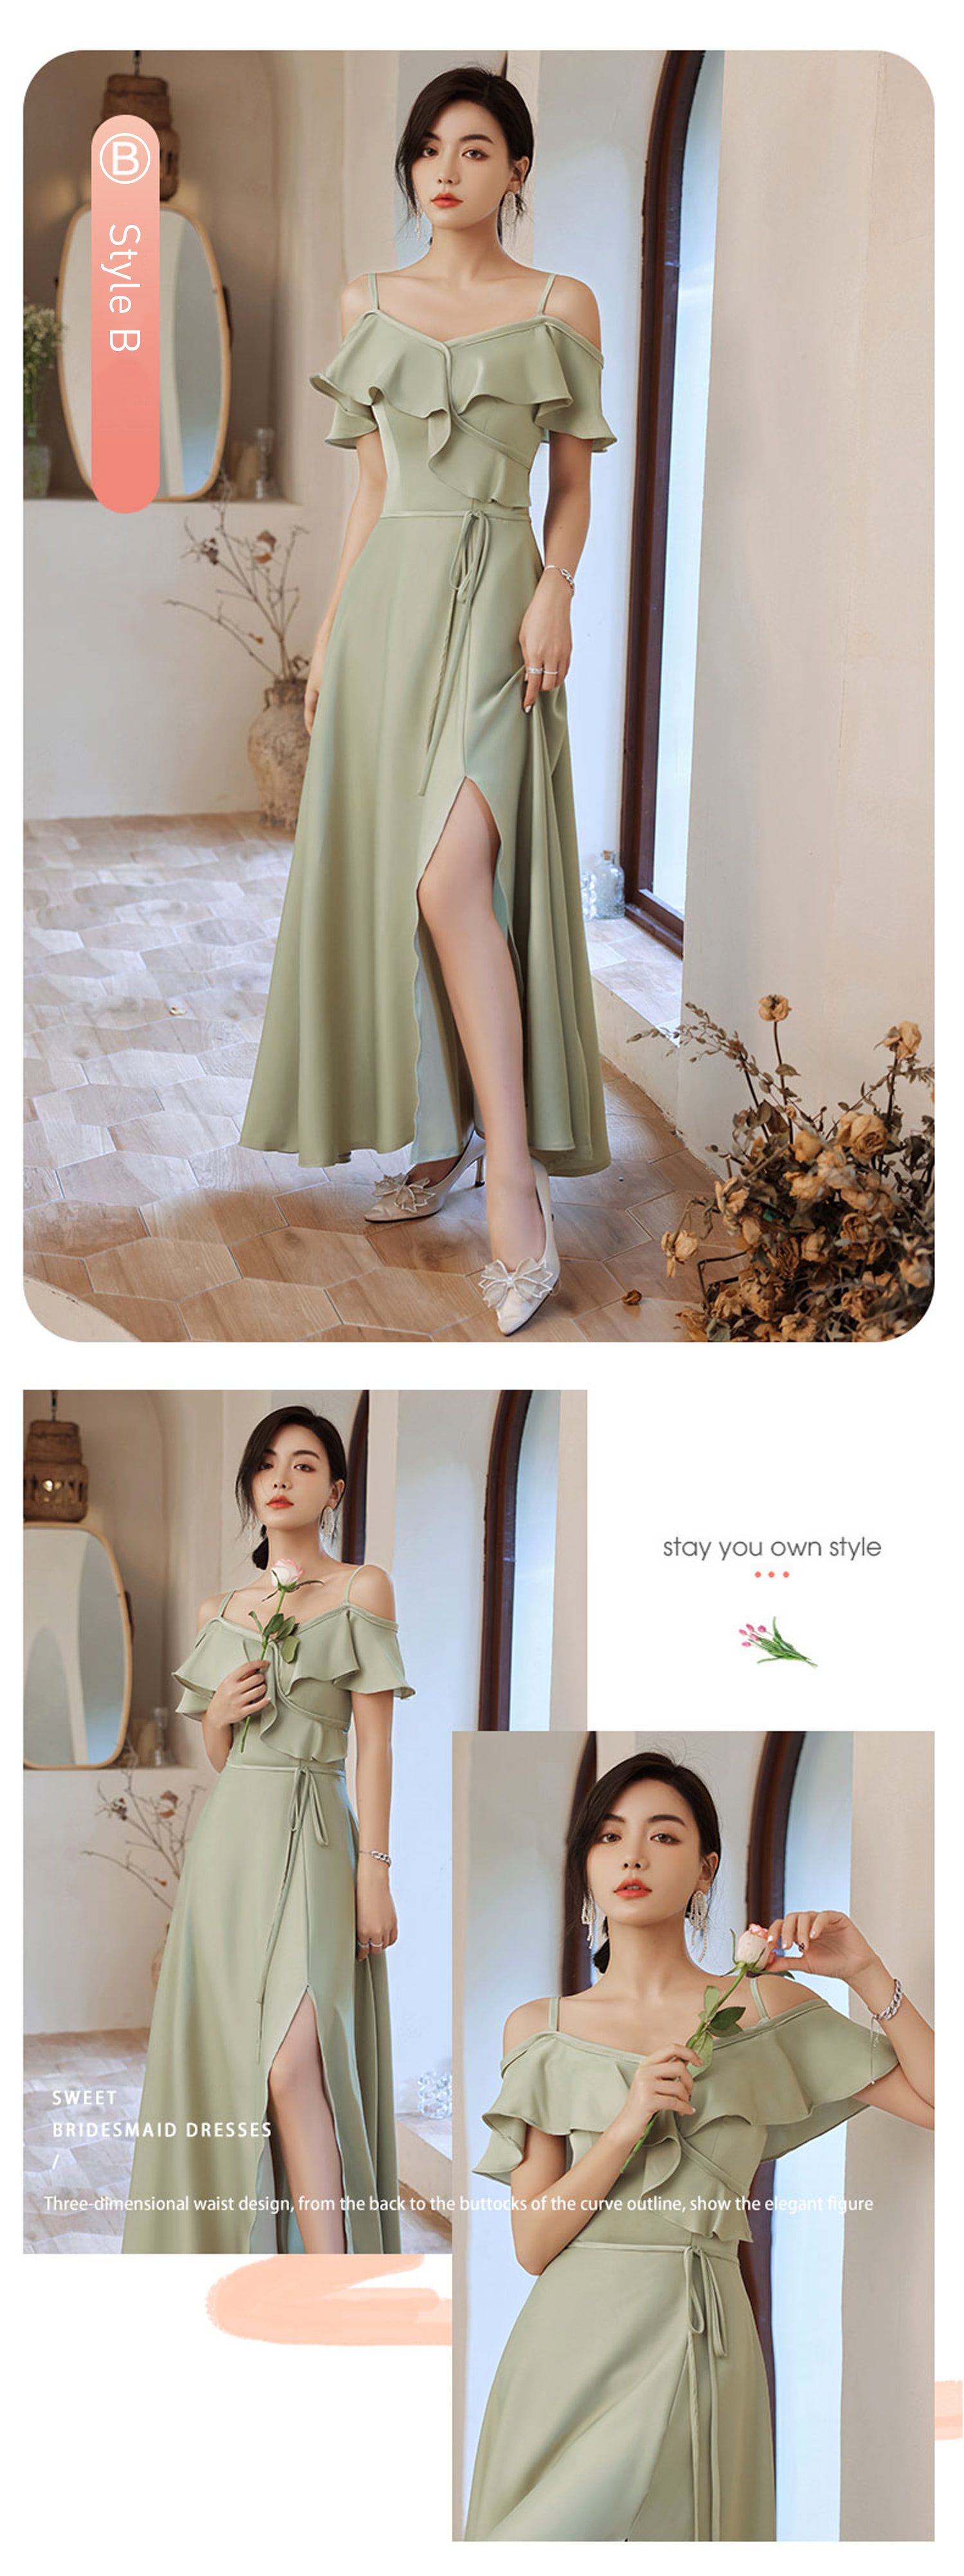 Simple-Olive-Green-Satin-Bridesmaid-Dress-Beach-Wedding-Guest-Outfit17